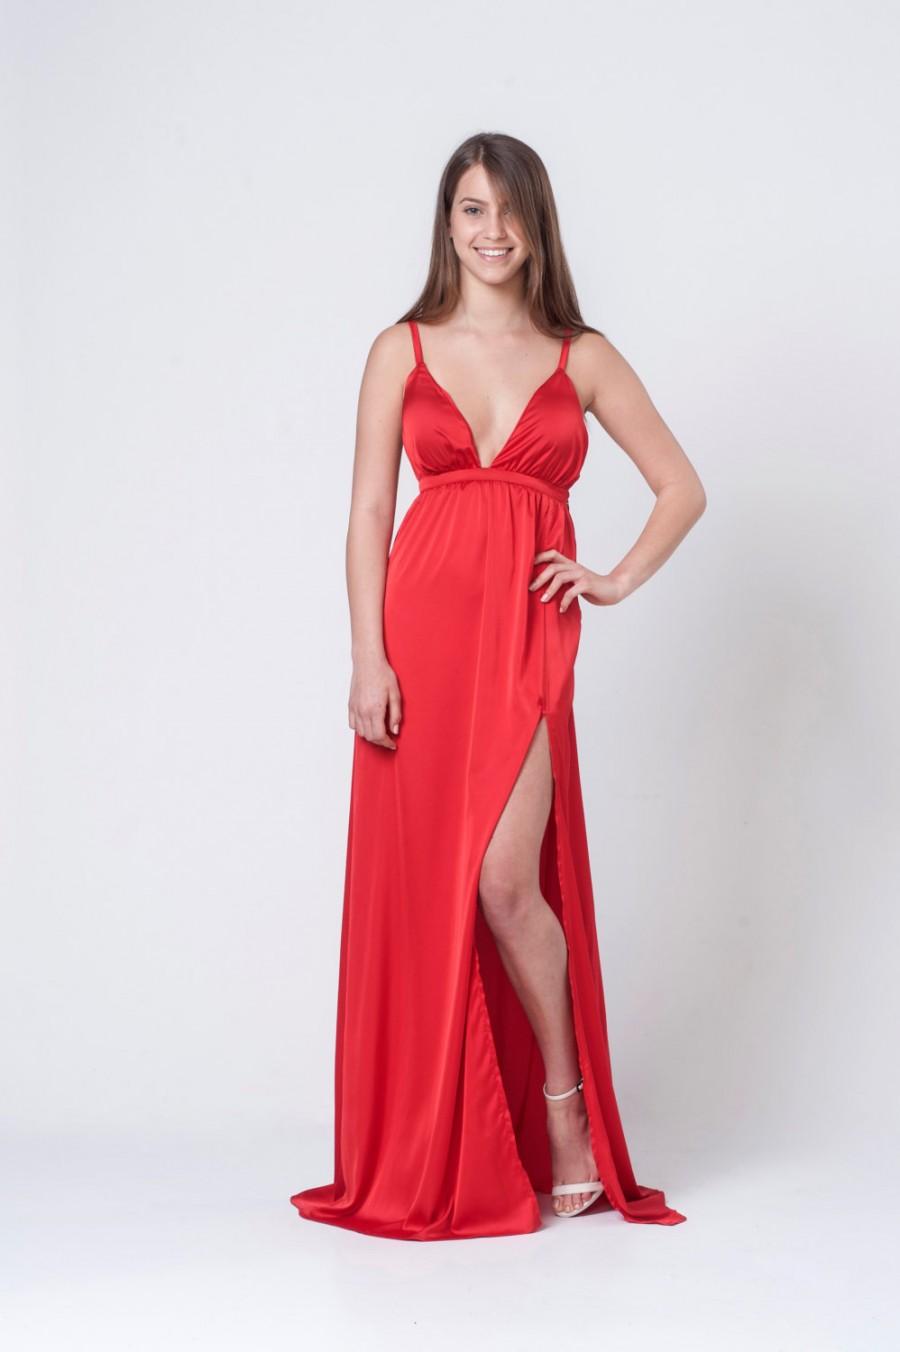 Mariage - Red satin bridesmaid dress - open back maxi dress - Deep front opening dress - spaghetti red dress